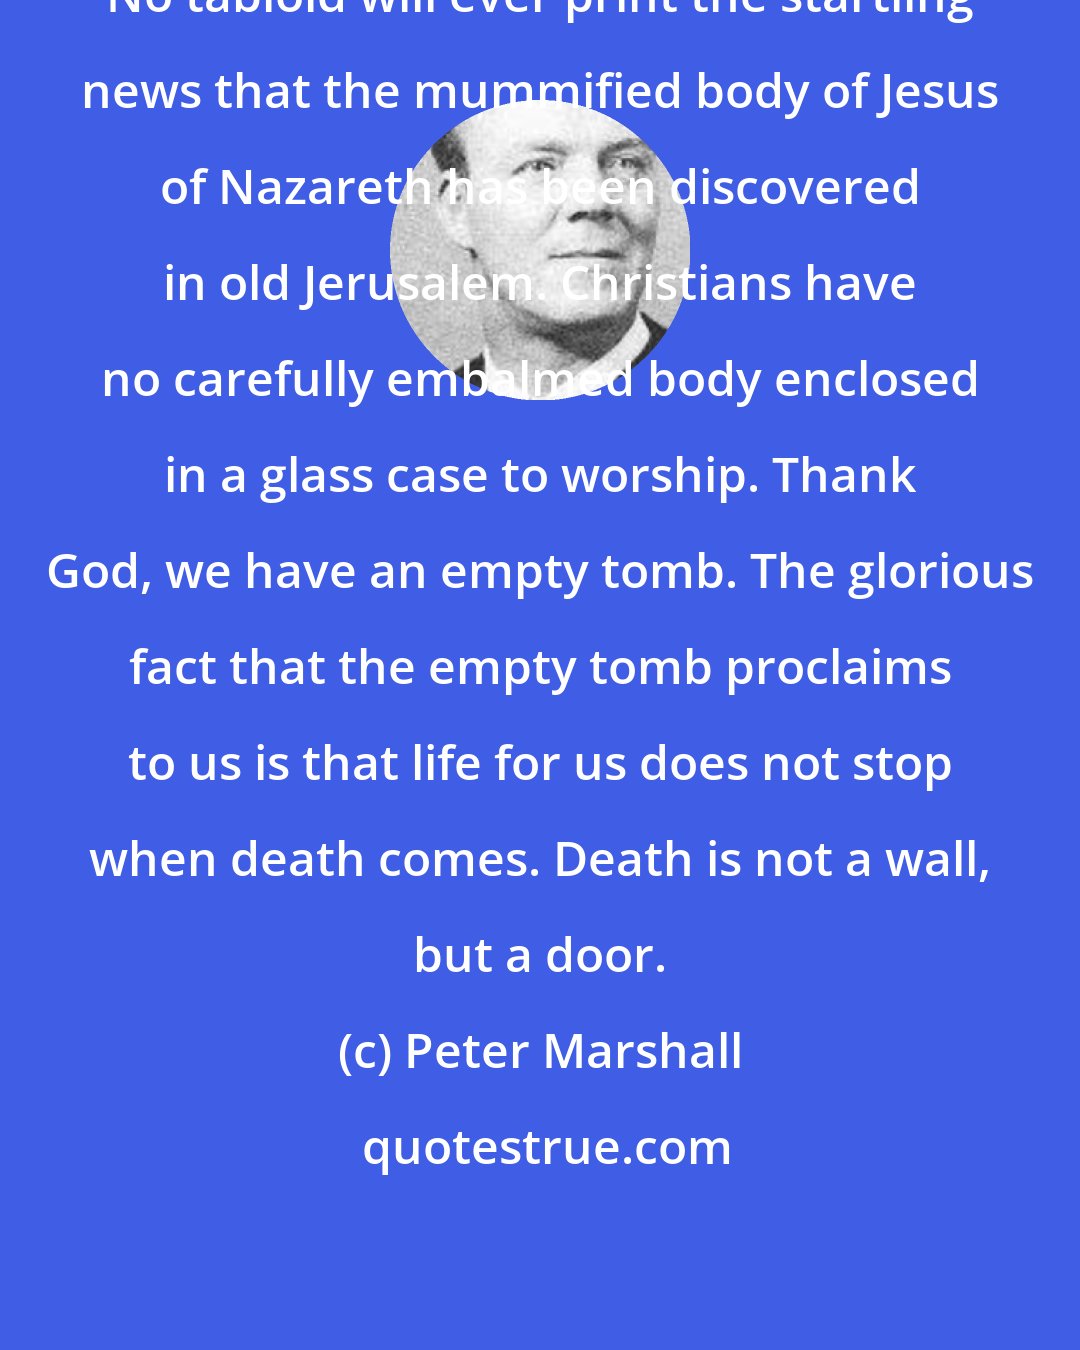 Peter Marshall: No tabloid will ever print the startling news that the mummified body of Jesus of Nazareth has been discovered in old Jerusalem. Christians have no carefully embalmed body enclosed in a glass case to worship. Thank God, we have an empty tomb. The glorious fact that the empty tomb proclaims to us is that life for us does not stop when death comes. Death is not a wall, but a door.